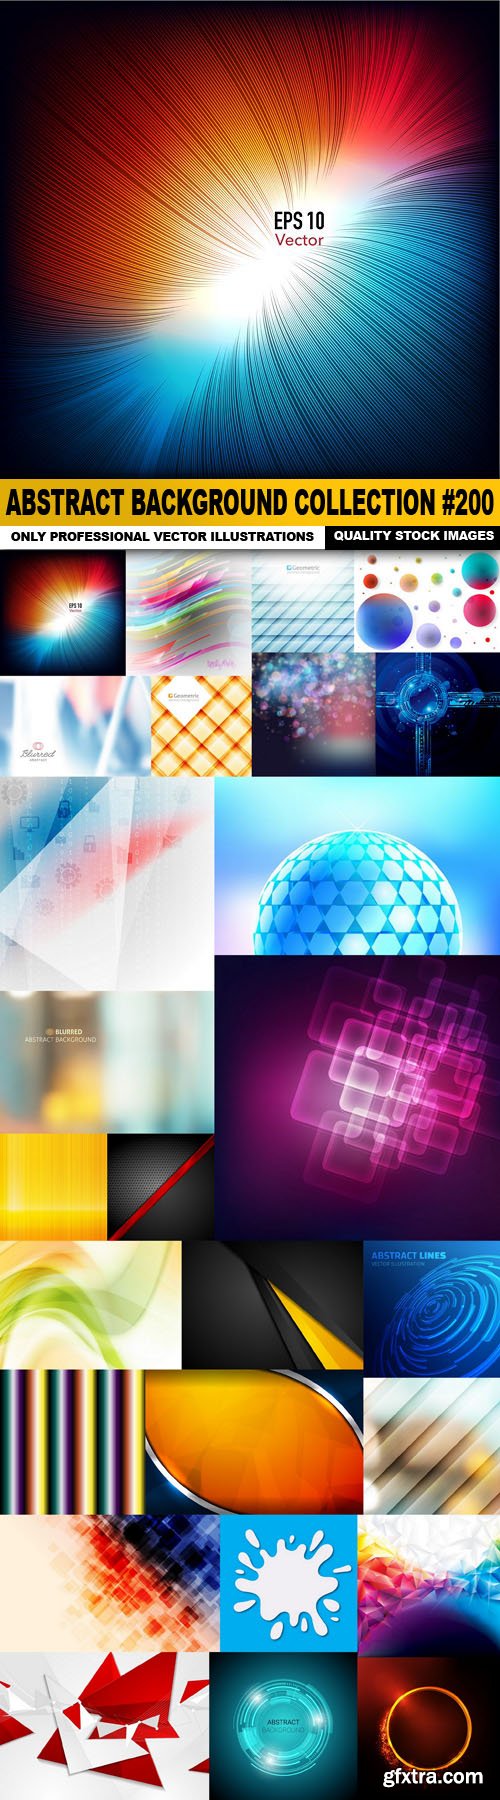 Abstract Background Collection #200 - 26 Vector